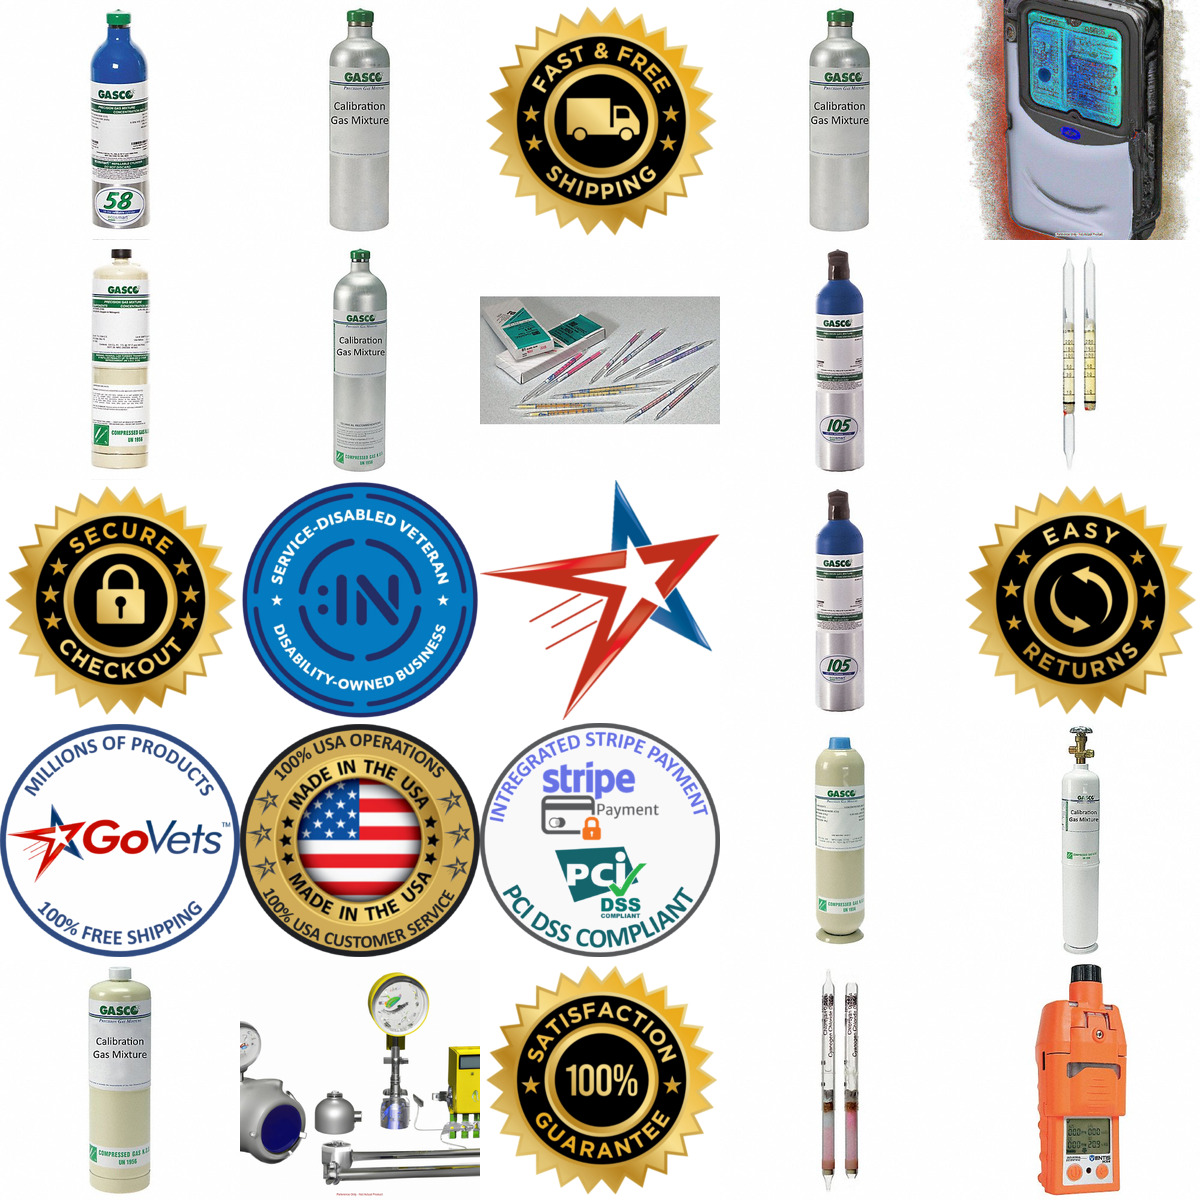 A selection of Gas Detection products on GoVets